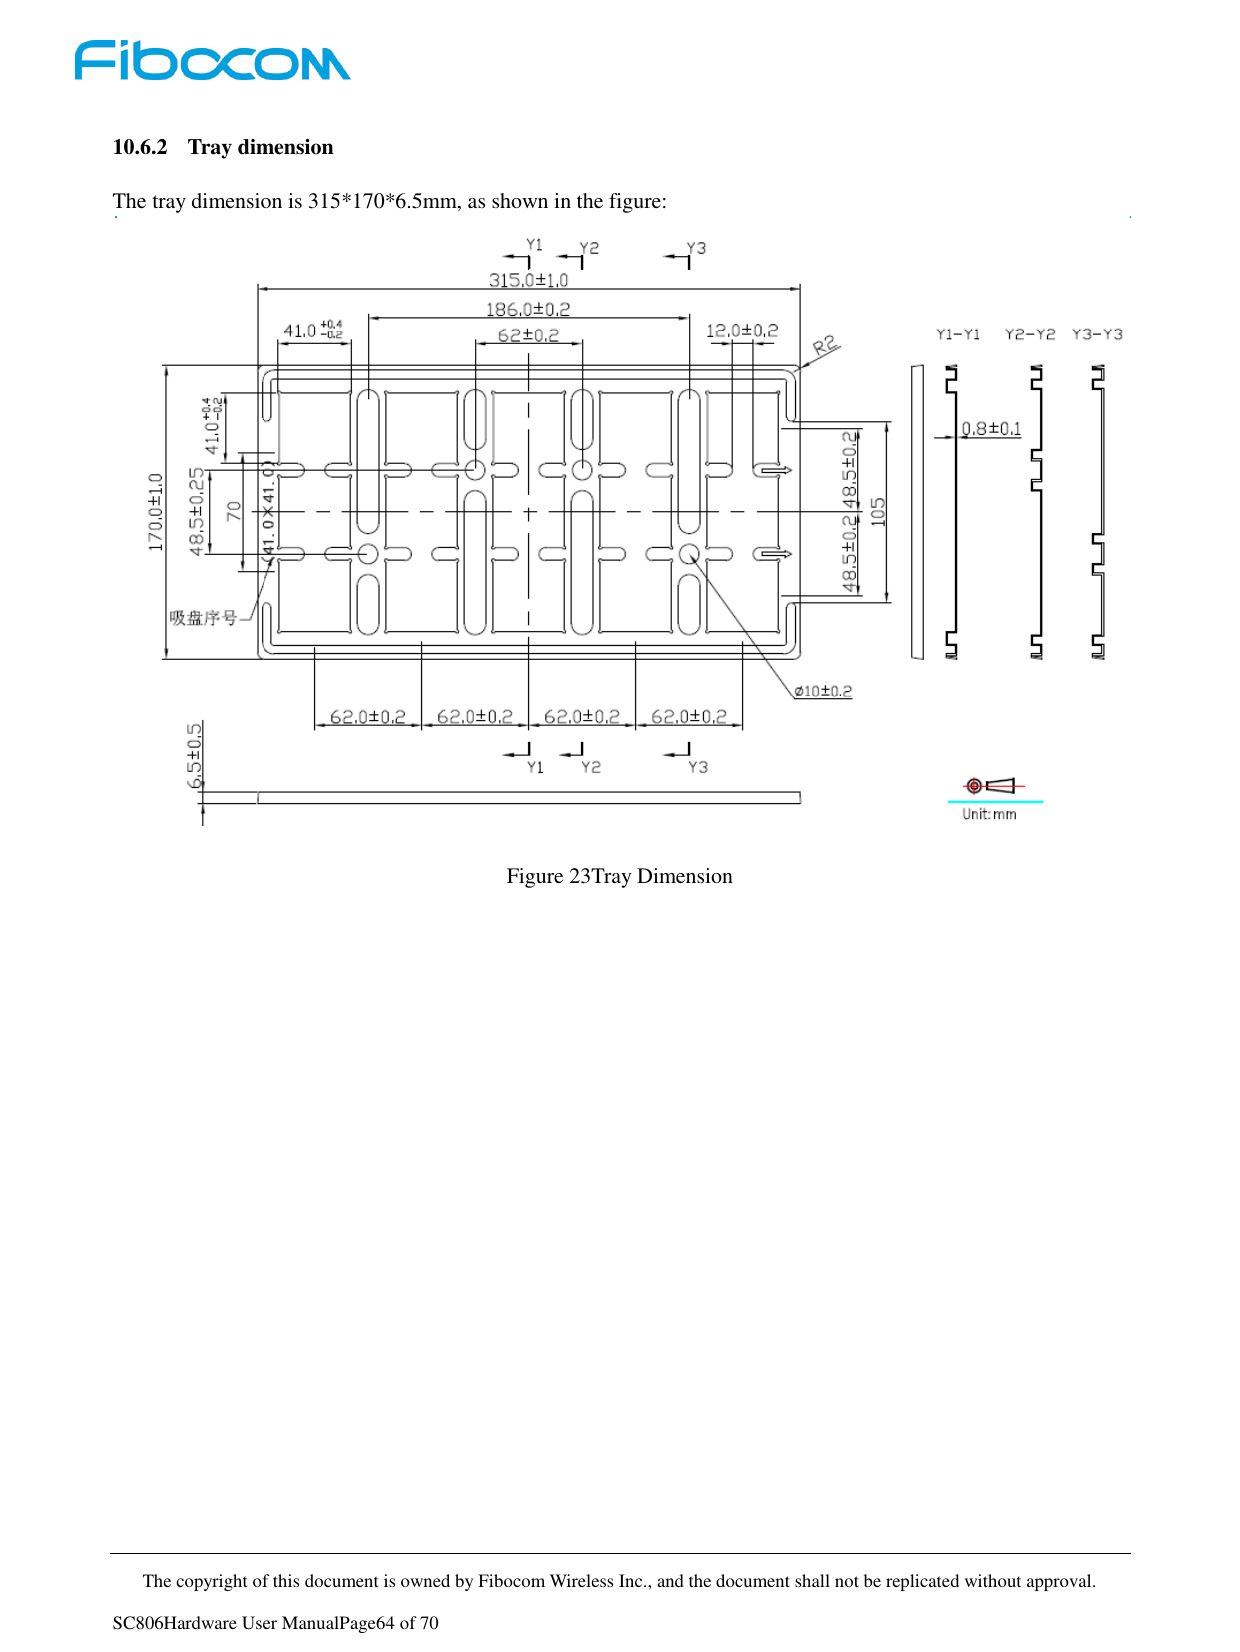     The copyright of this document is owned by Fibocom Wireless Inc., and the document shall not be replicated without approval.   SC806Hardware User ManualPage64 of 70 10.6.2 Tray dimension The tray dimension is 315*170*6.5mm, as shown in the figure:   Figure 23Tray Dimension               